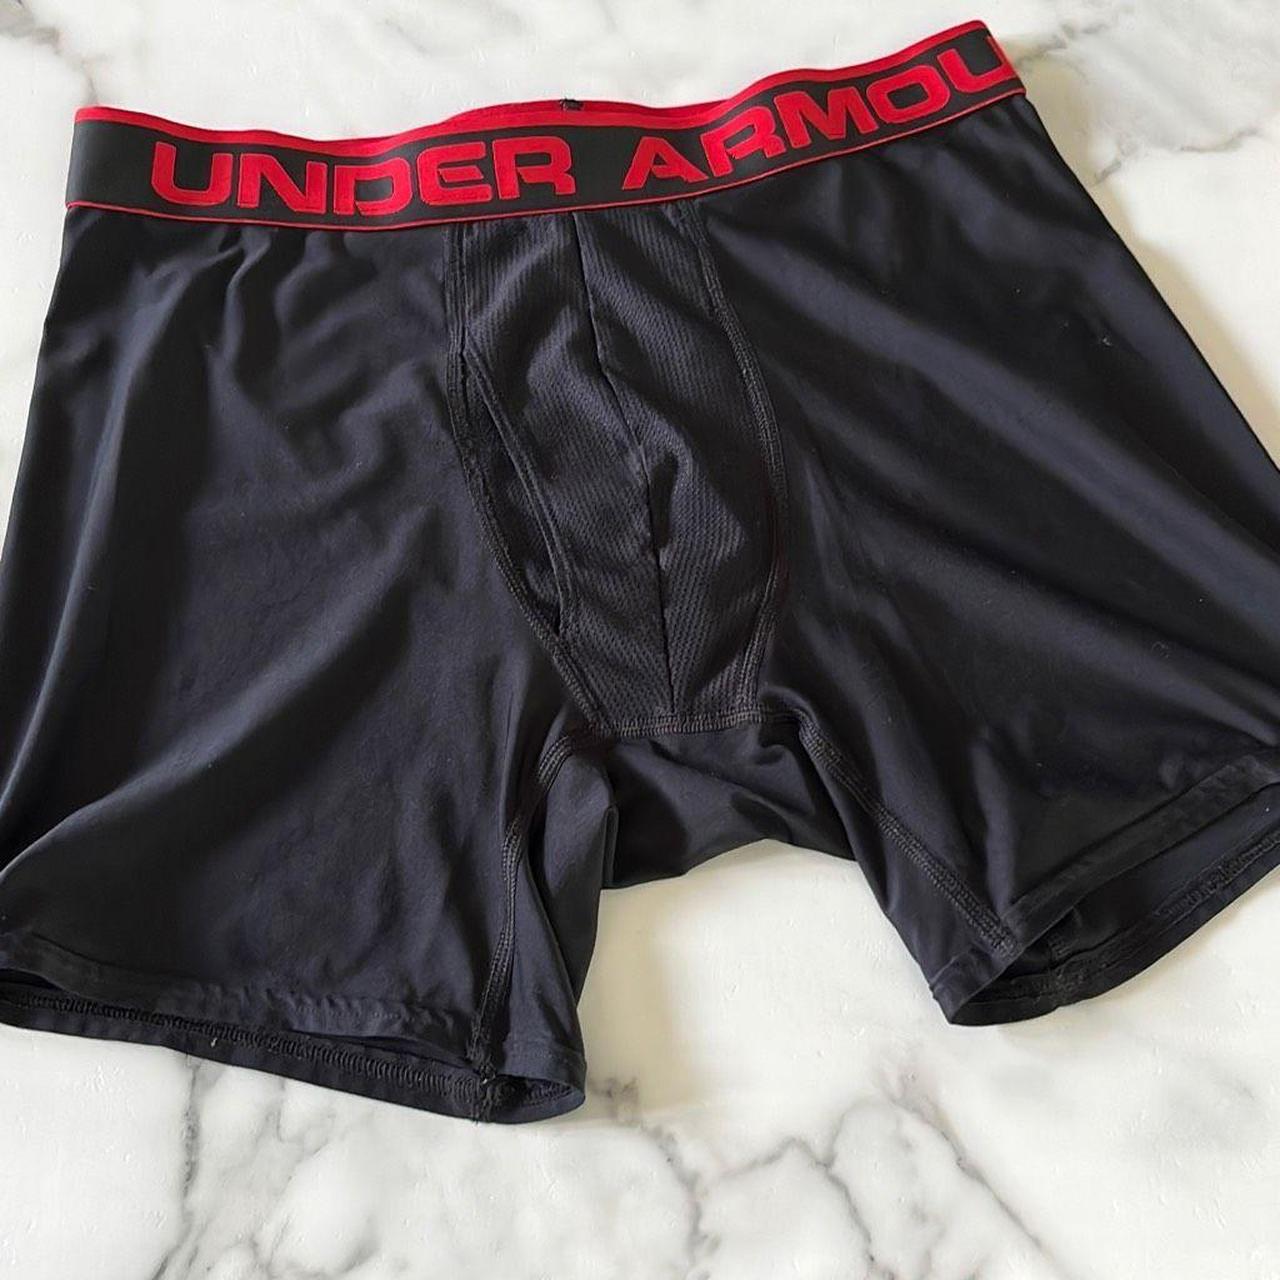 Men's Under Armour Boxers, New & Used